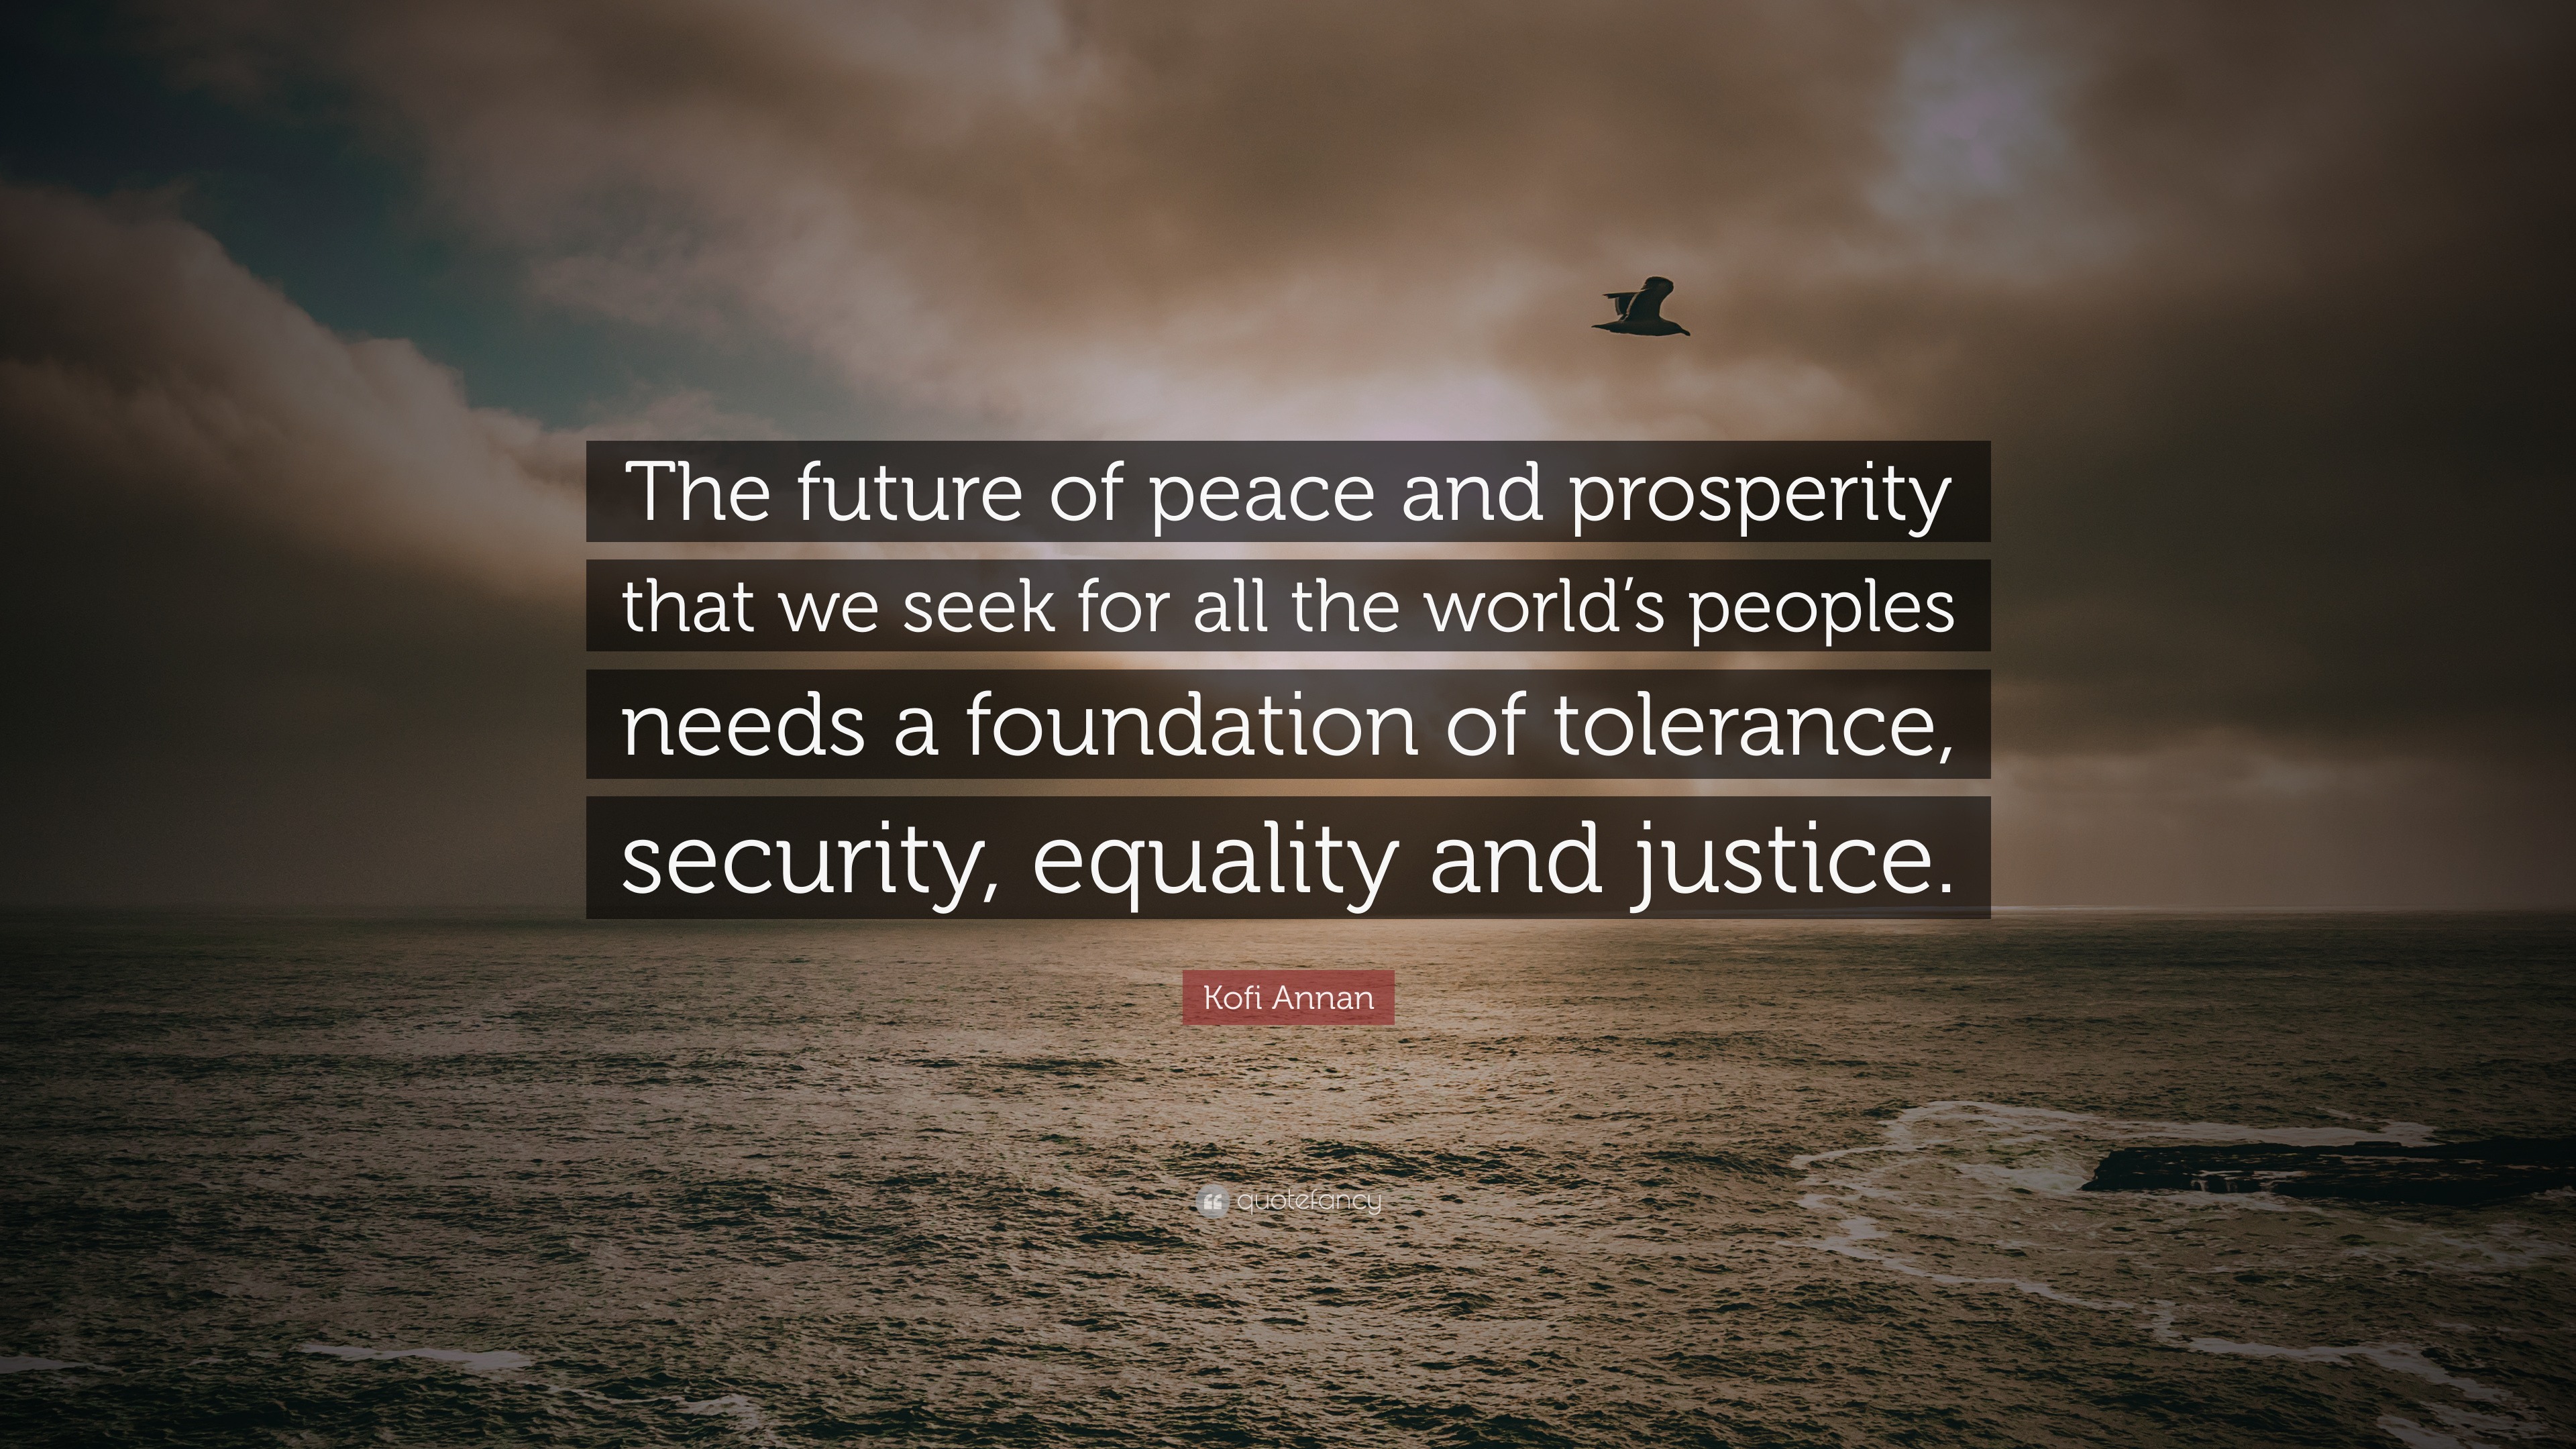 essay justice ensures peace and prosperity